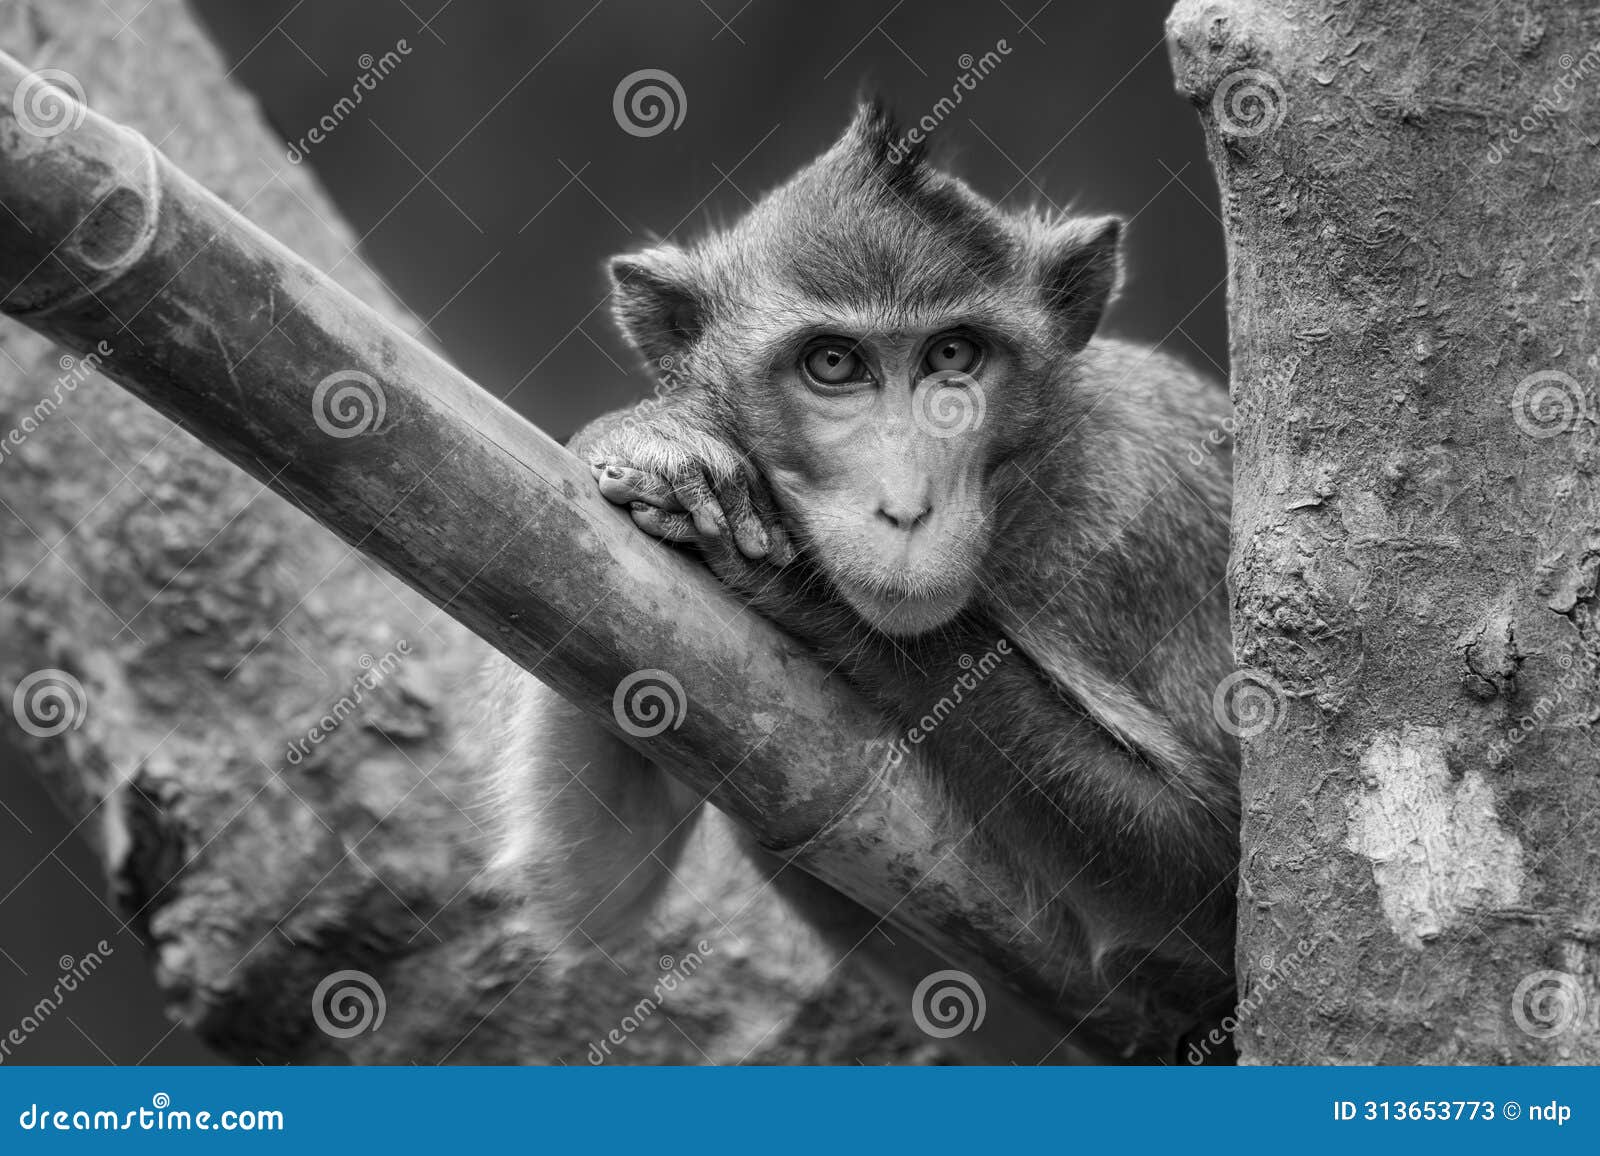 mono long-tailed macaque leaning head on paws